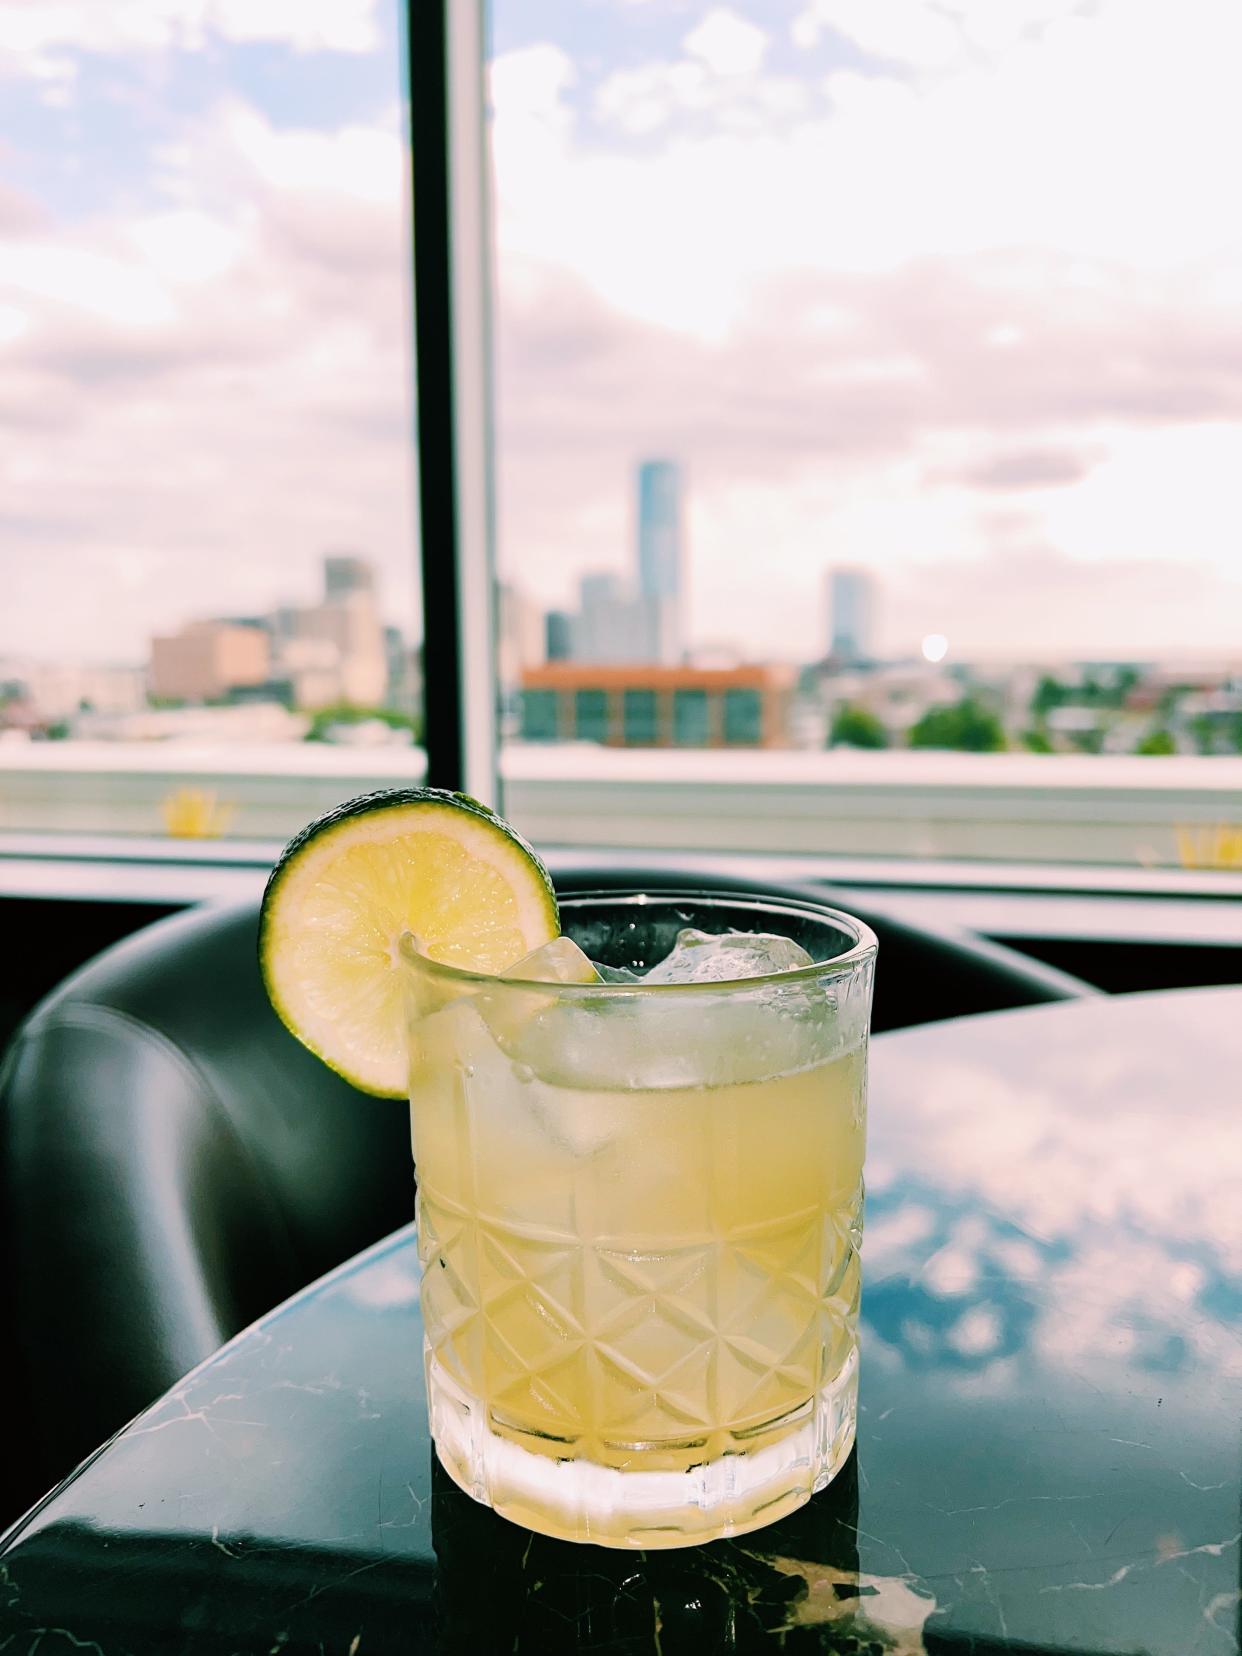 The Giddey Up cocktail, available at O Bar during the OKC Thunder's playoff run.